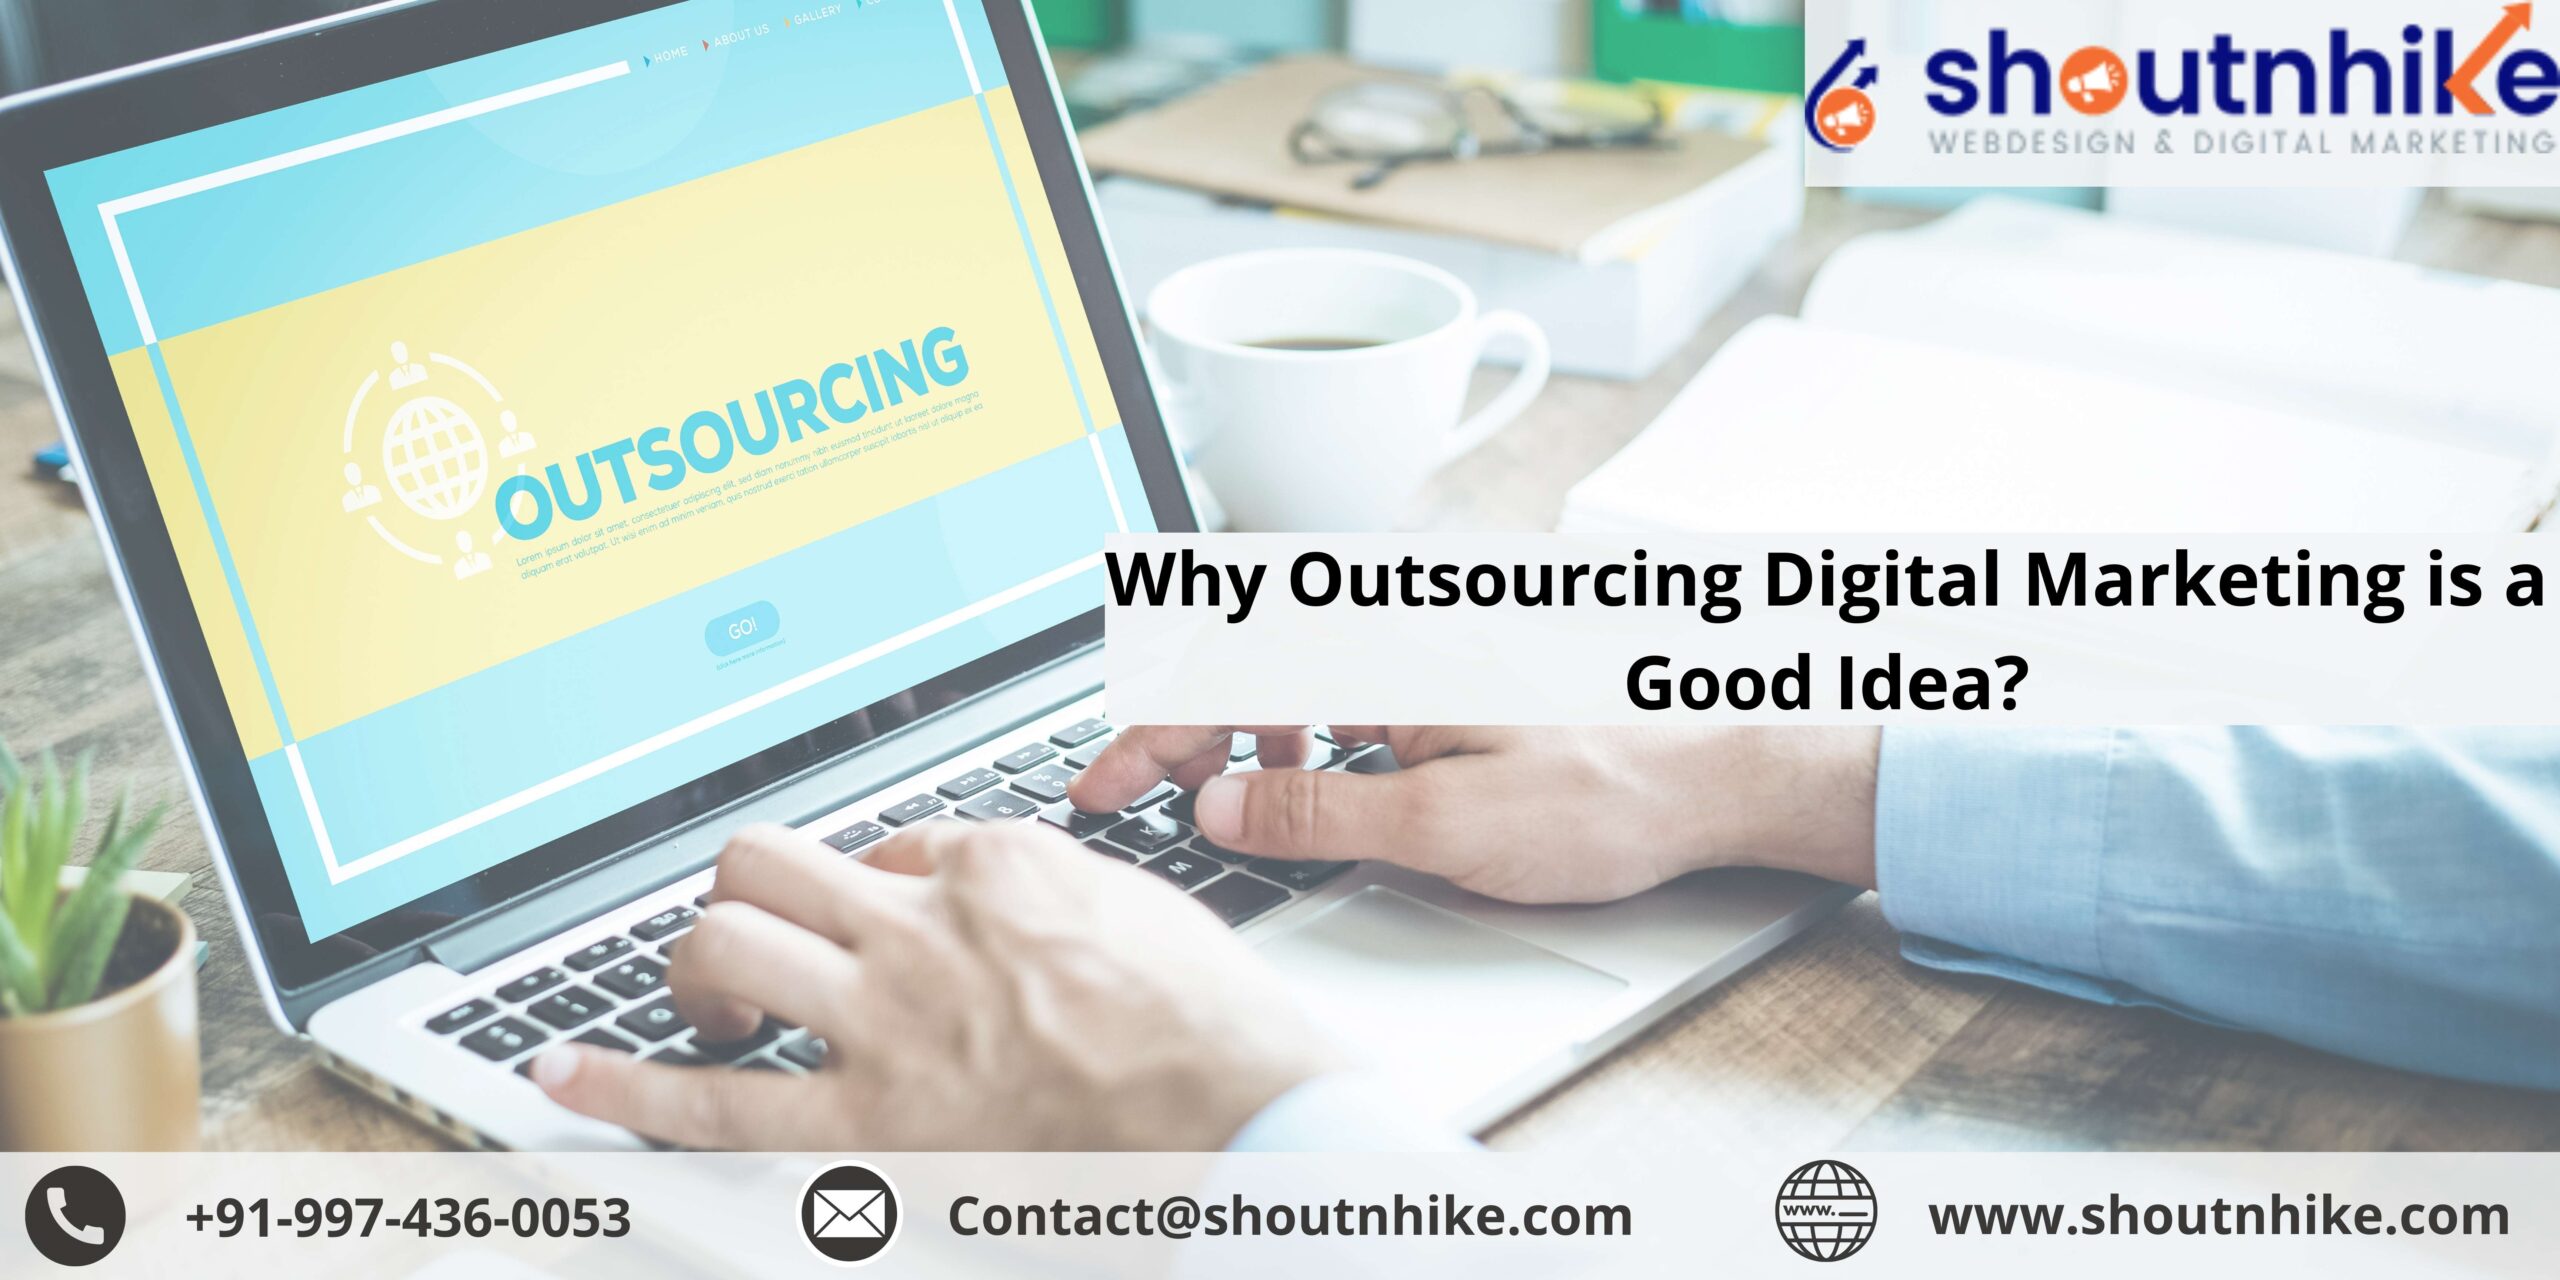 Why Outsourcing Digital Marketing is a Good Idea